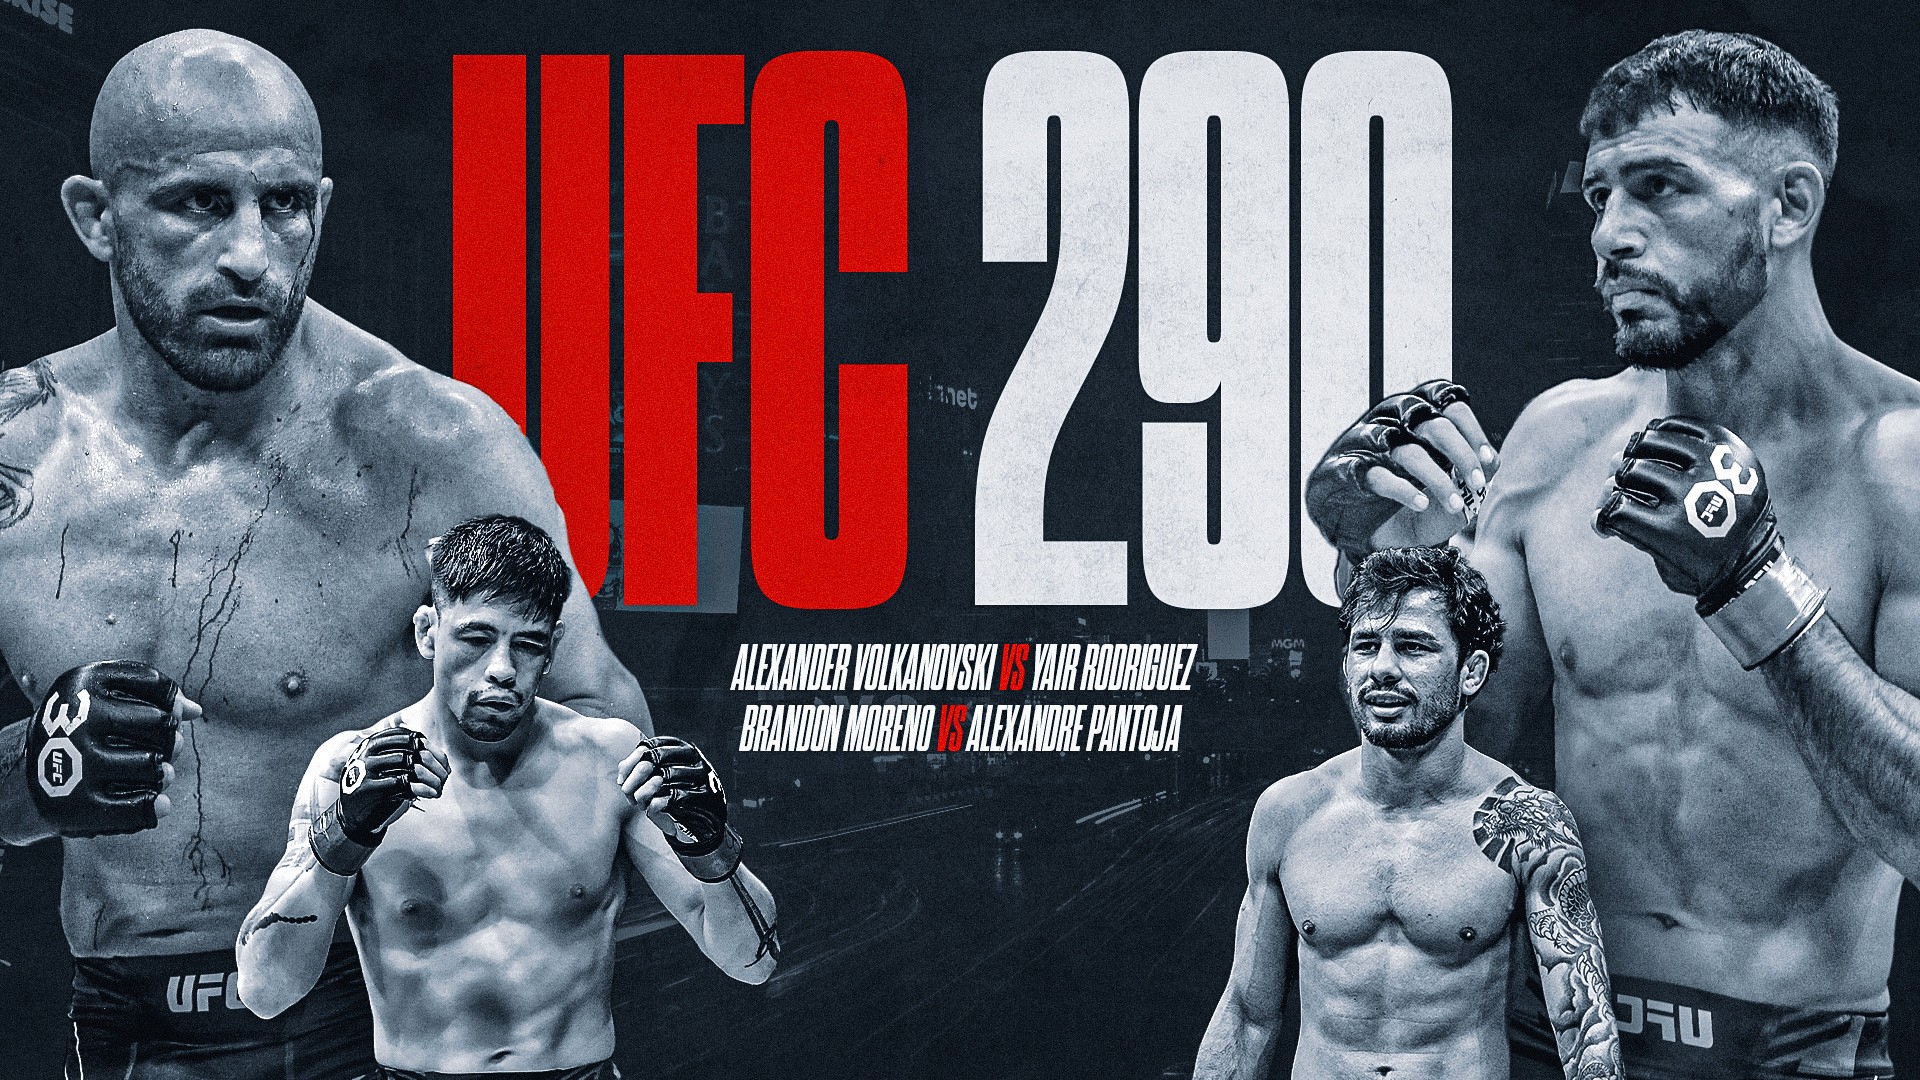 THE BIGGEST SHOW OF THE YEAR IS HERE: UFC 290 PREVIEW